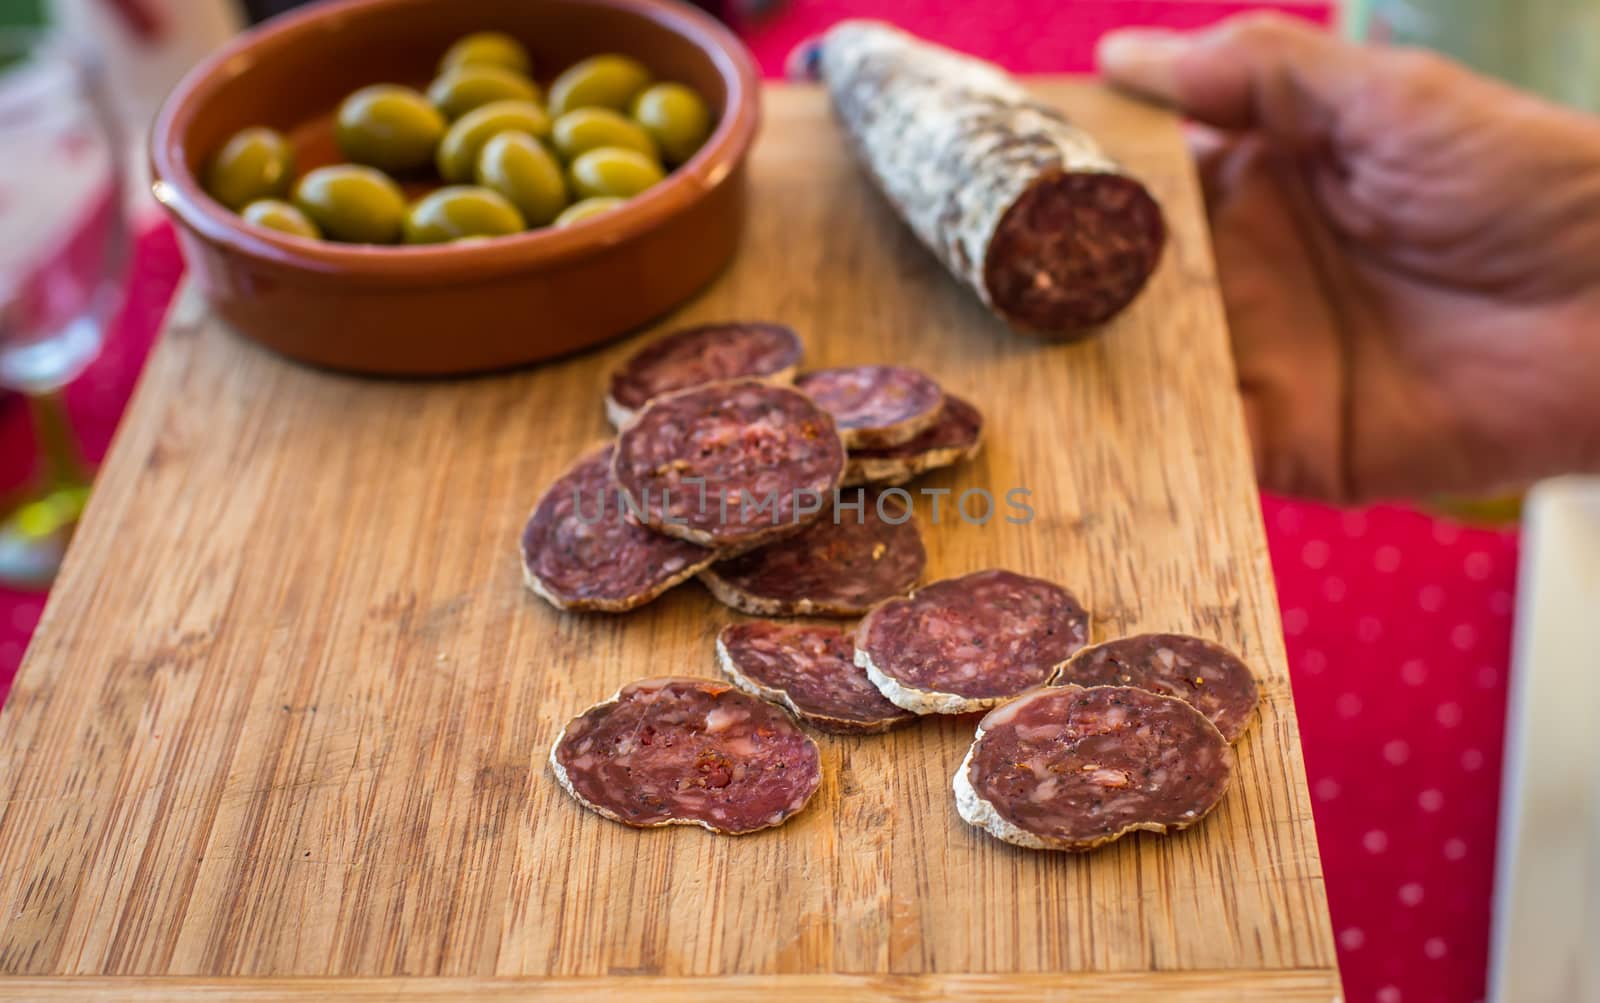 sliced sausage with green olives on a wooden board on the table